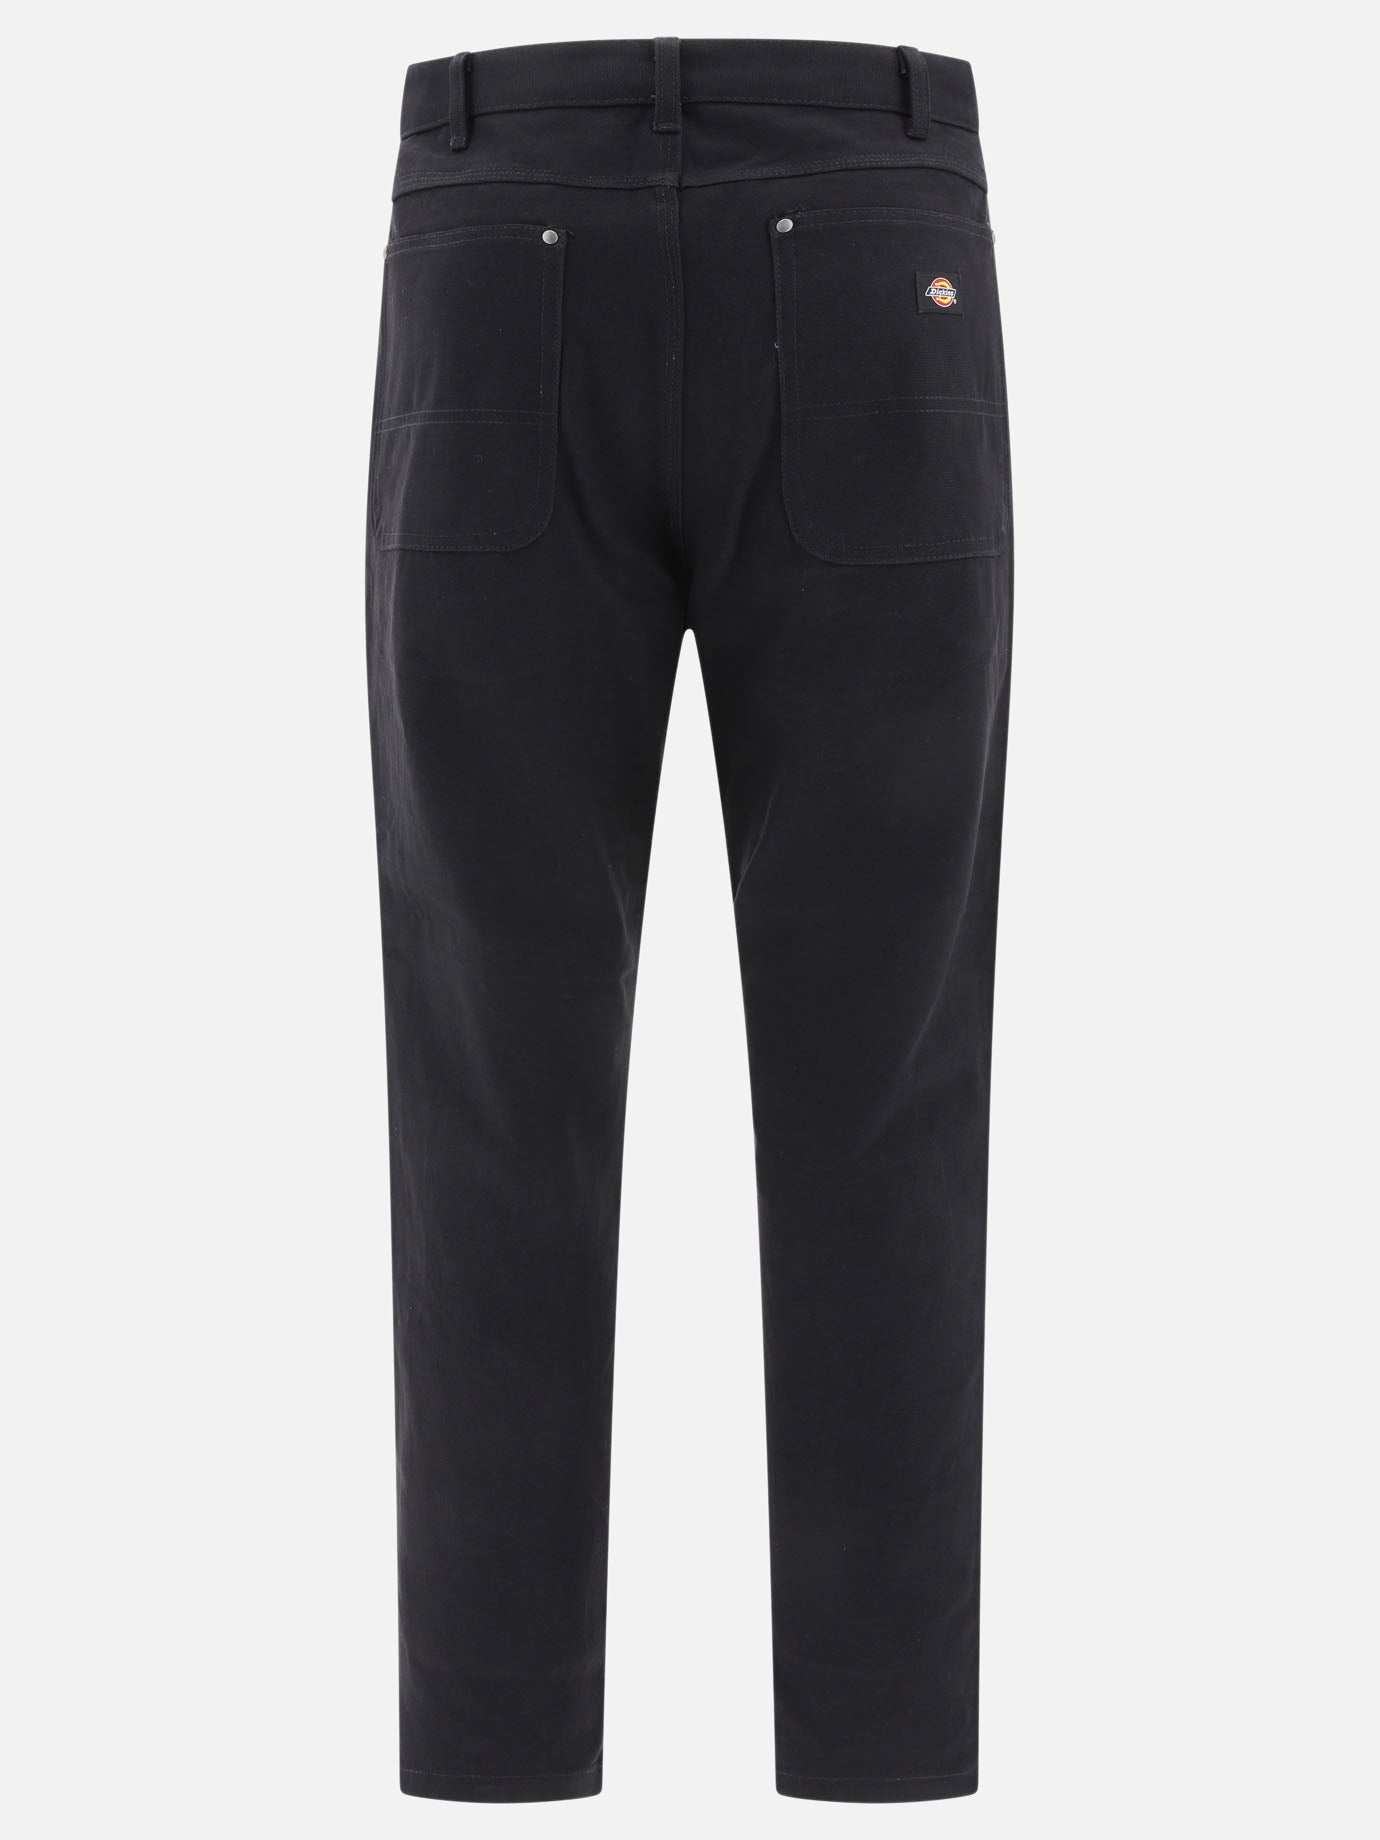 "Duck Canvas" trousers